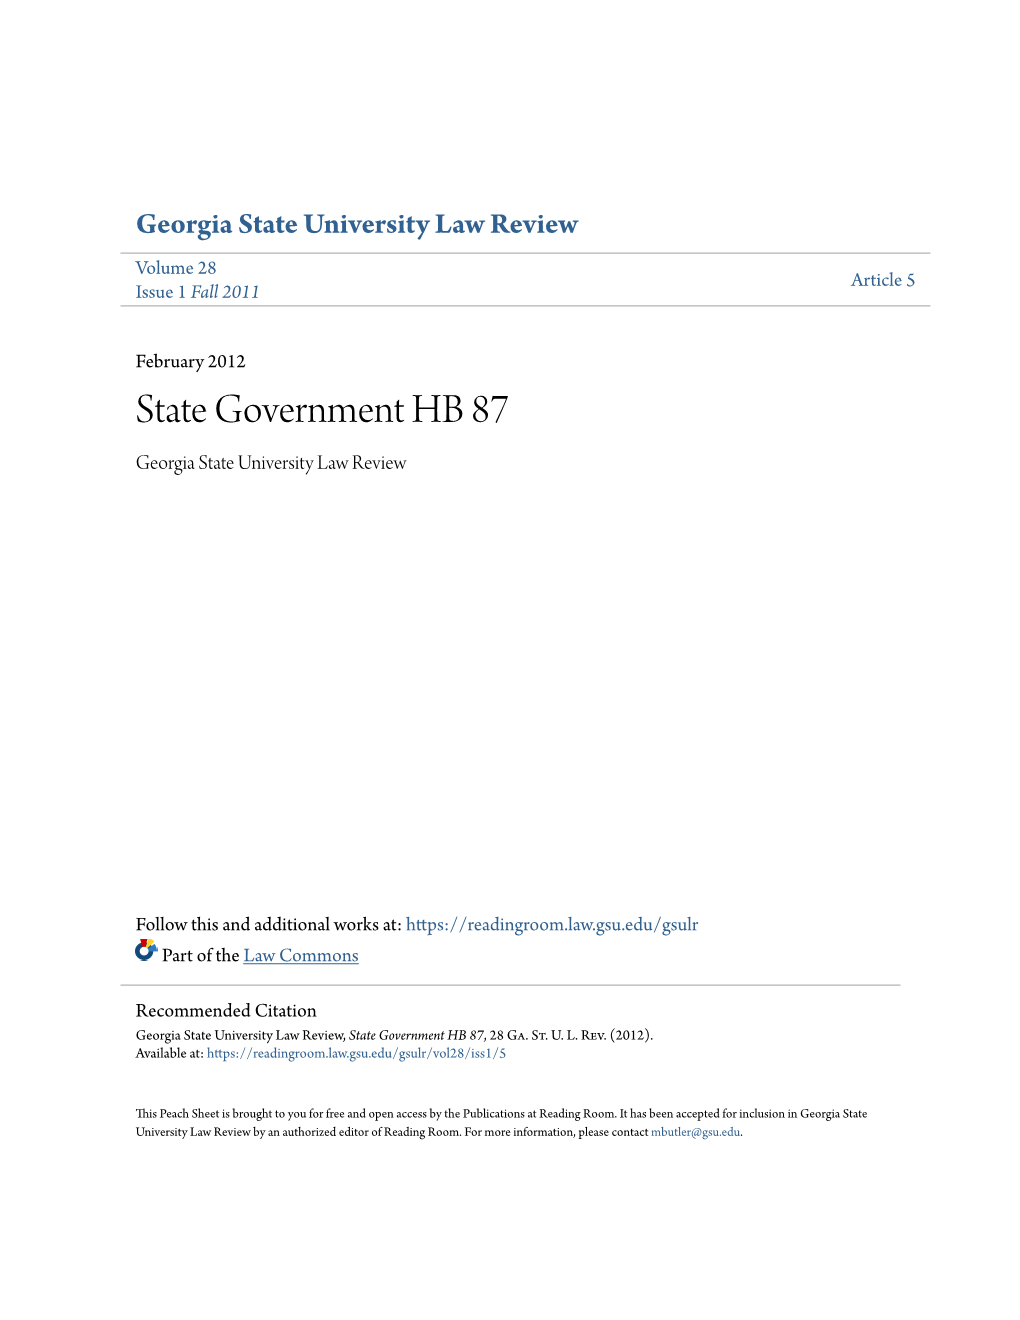 State Government HB 87 Georgia State University Law Review